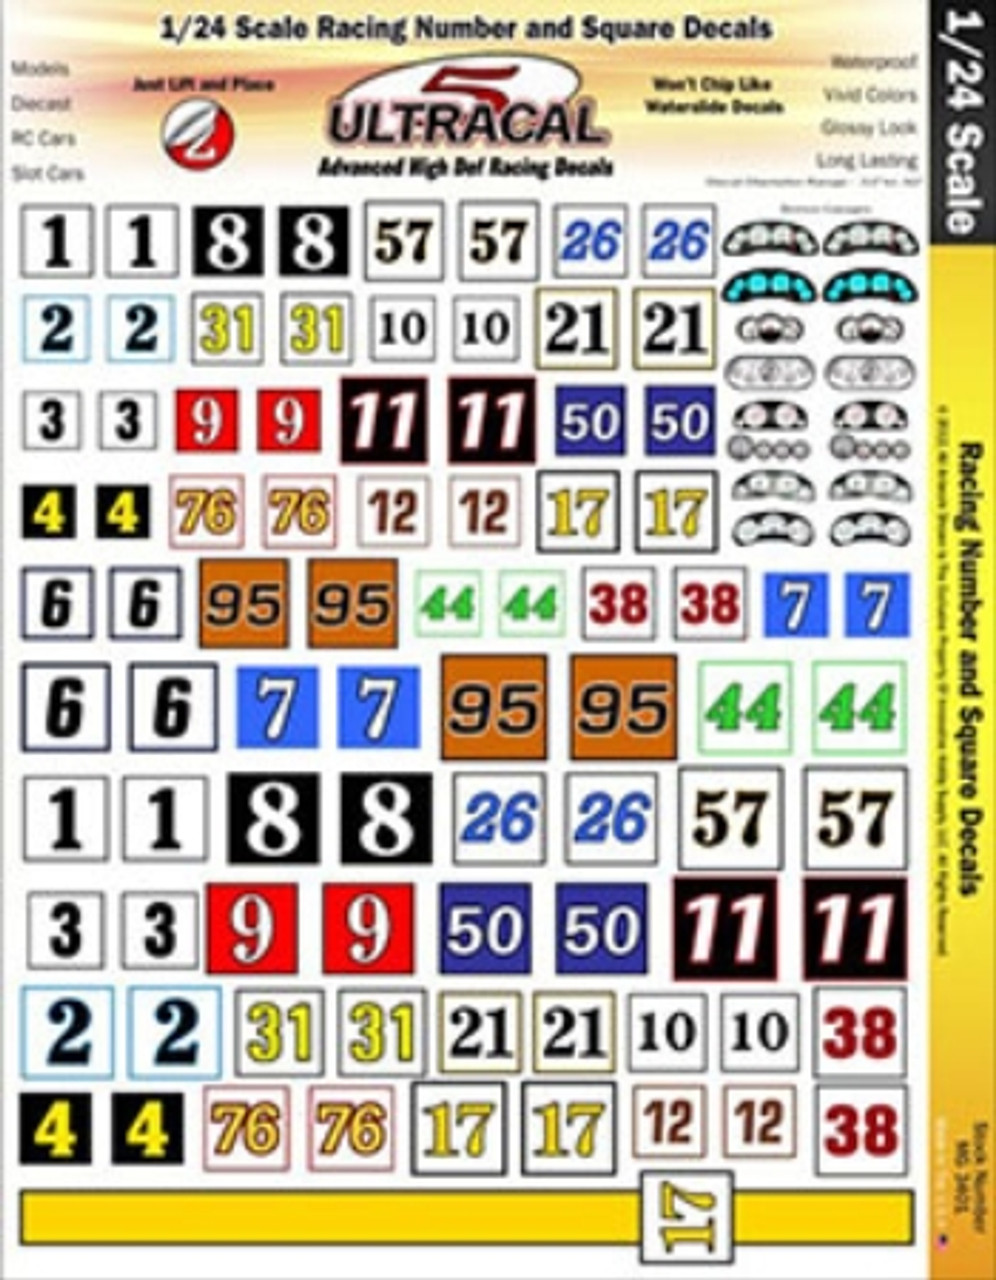 ULTRACAL 1/24 SCALE VINTAGE RACING NUMBERS PEEL AND STICK MG 6420-2 